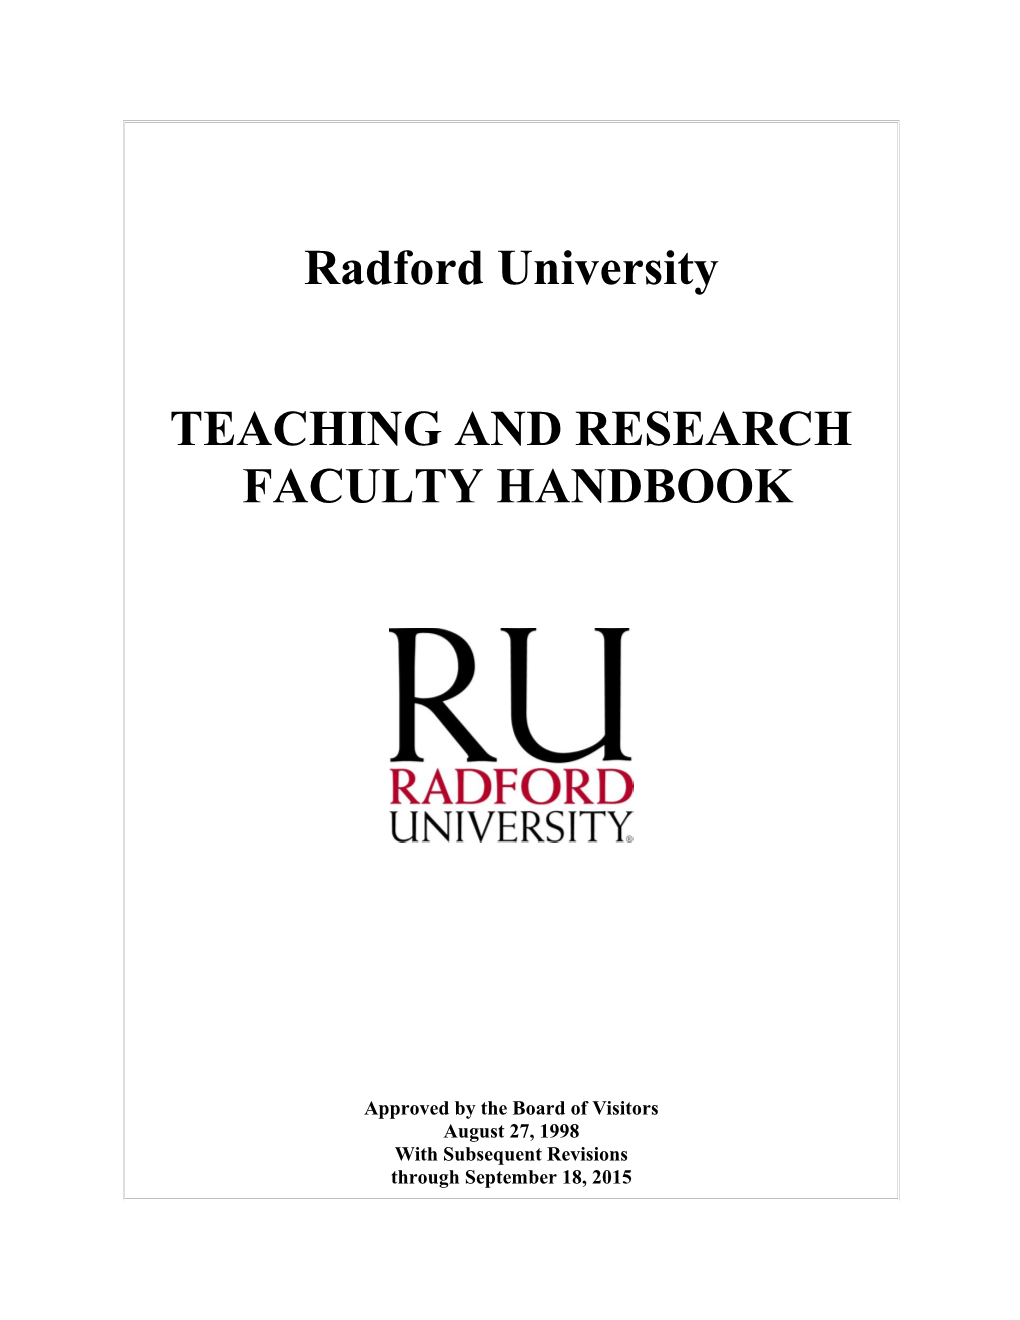 Teaching and Research